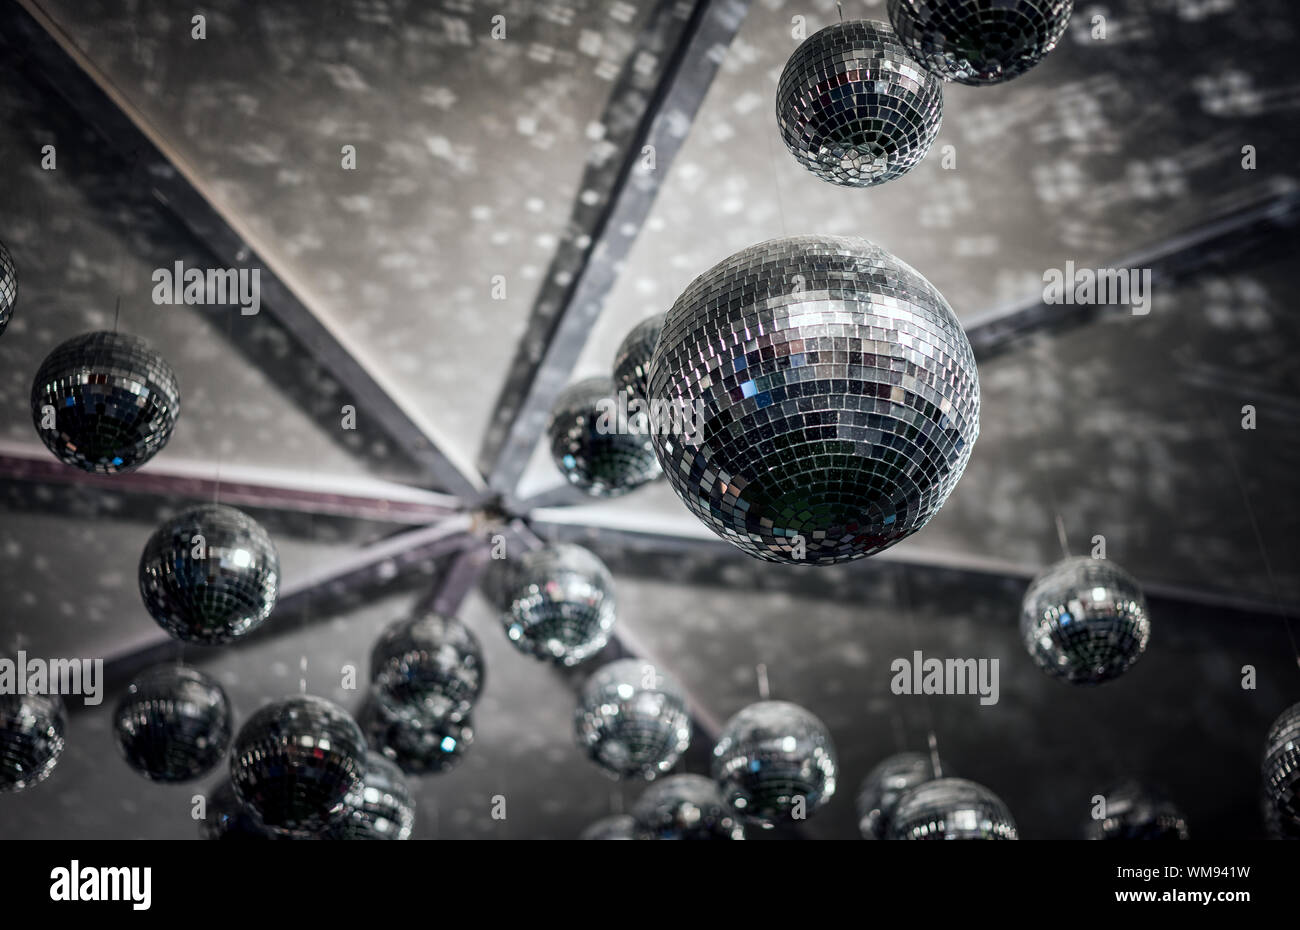 Low Angle View Of Disco Balls Hanging From Ceiling Stock